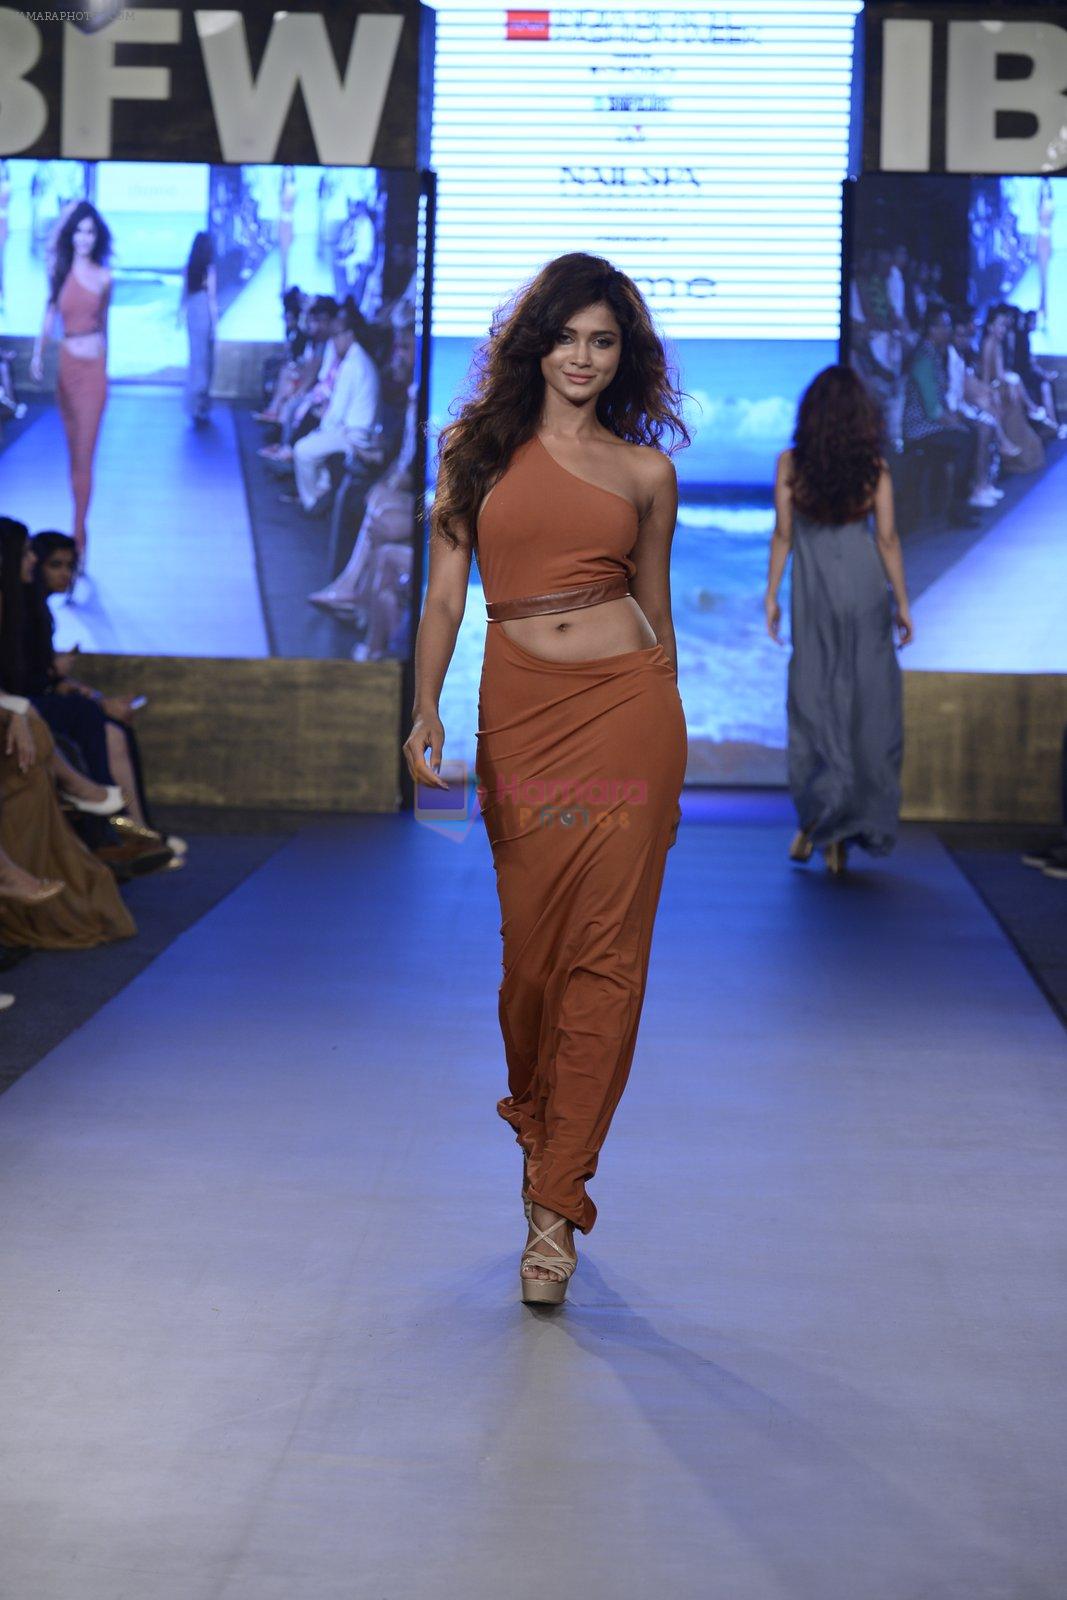 Model walk the ramp for Deme by Gabriella Show on day 2 of Gionee India Beach Fashion Week on 30th Oct 2015